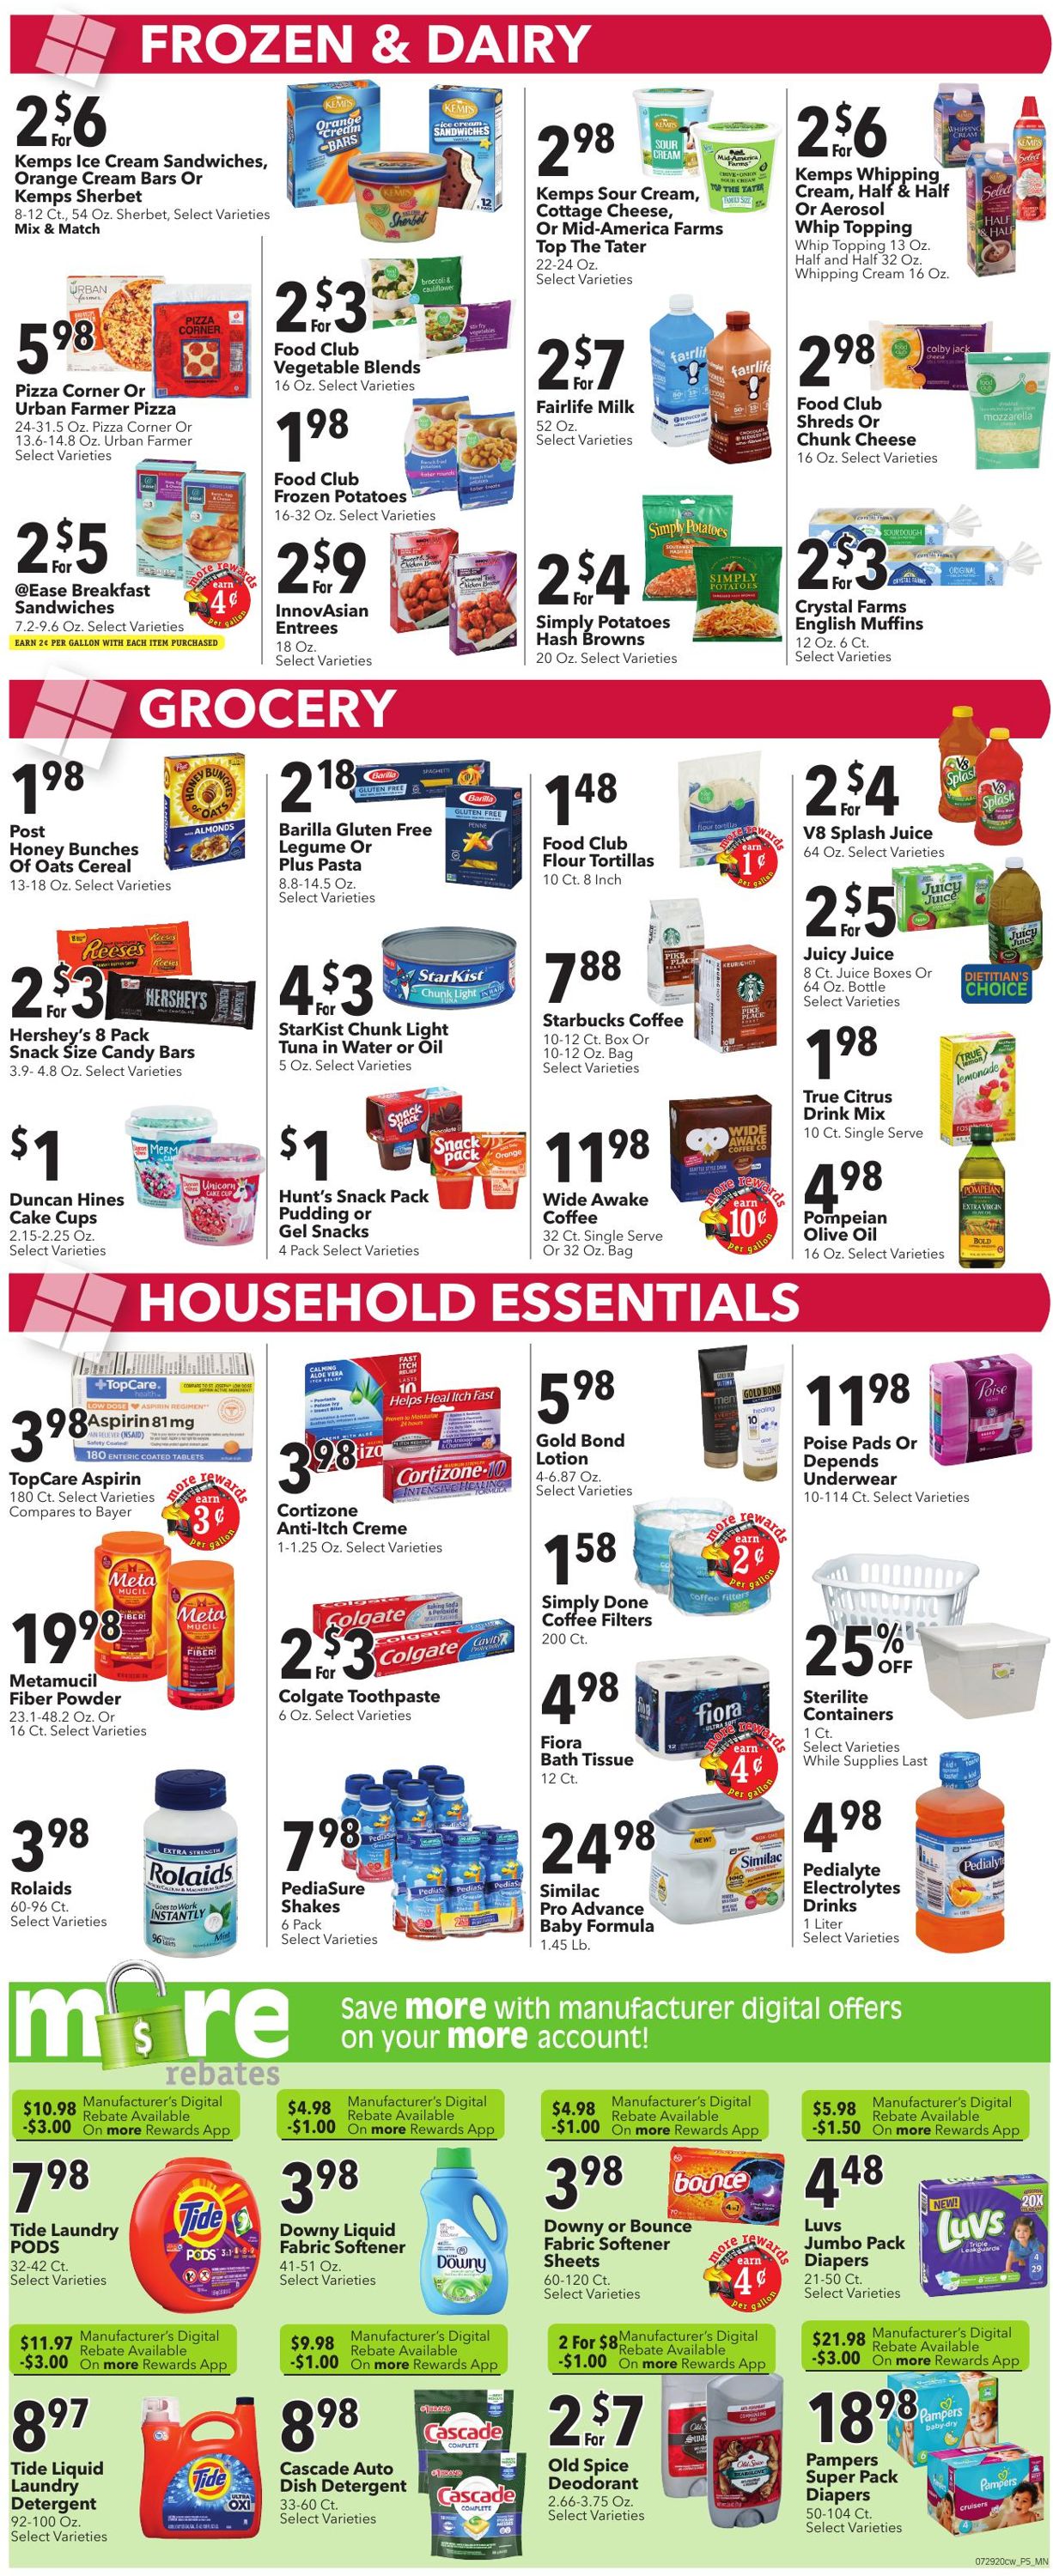 Cash Wise Weekly Ad Circular - valid 07/29-08/04/2020 (Page 4)